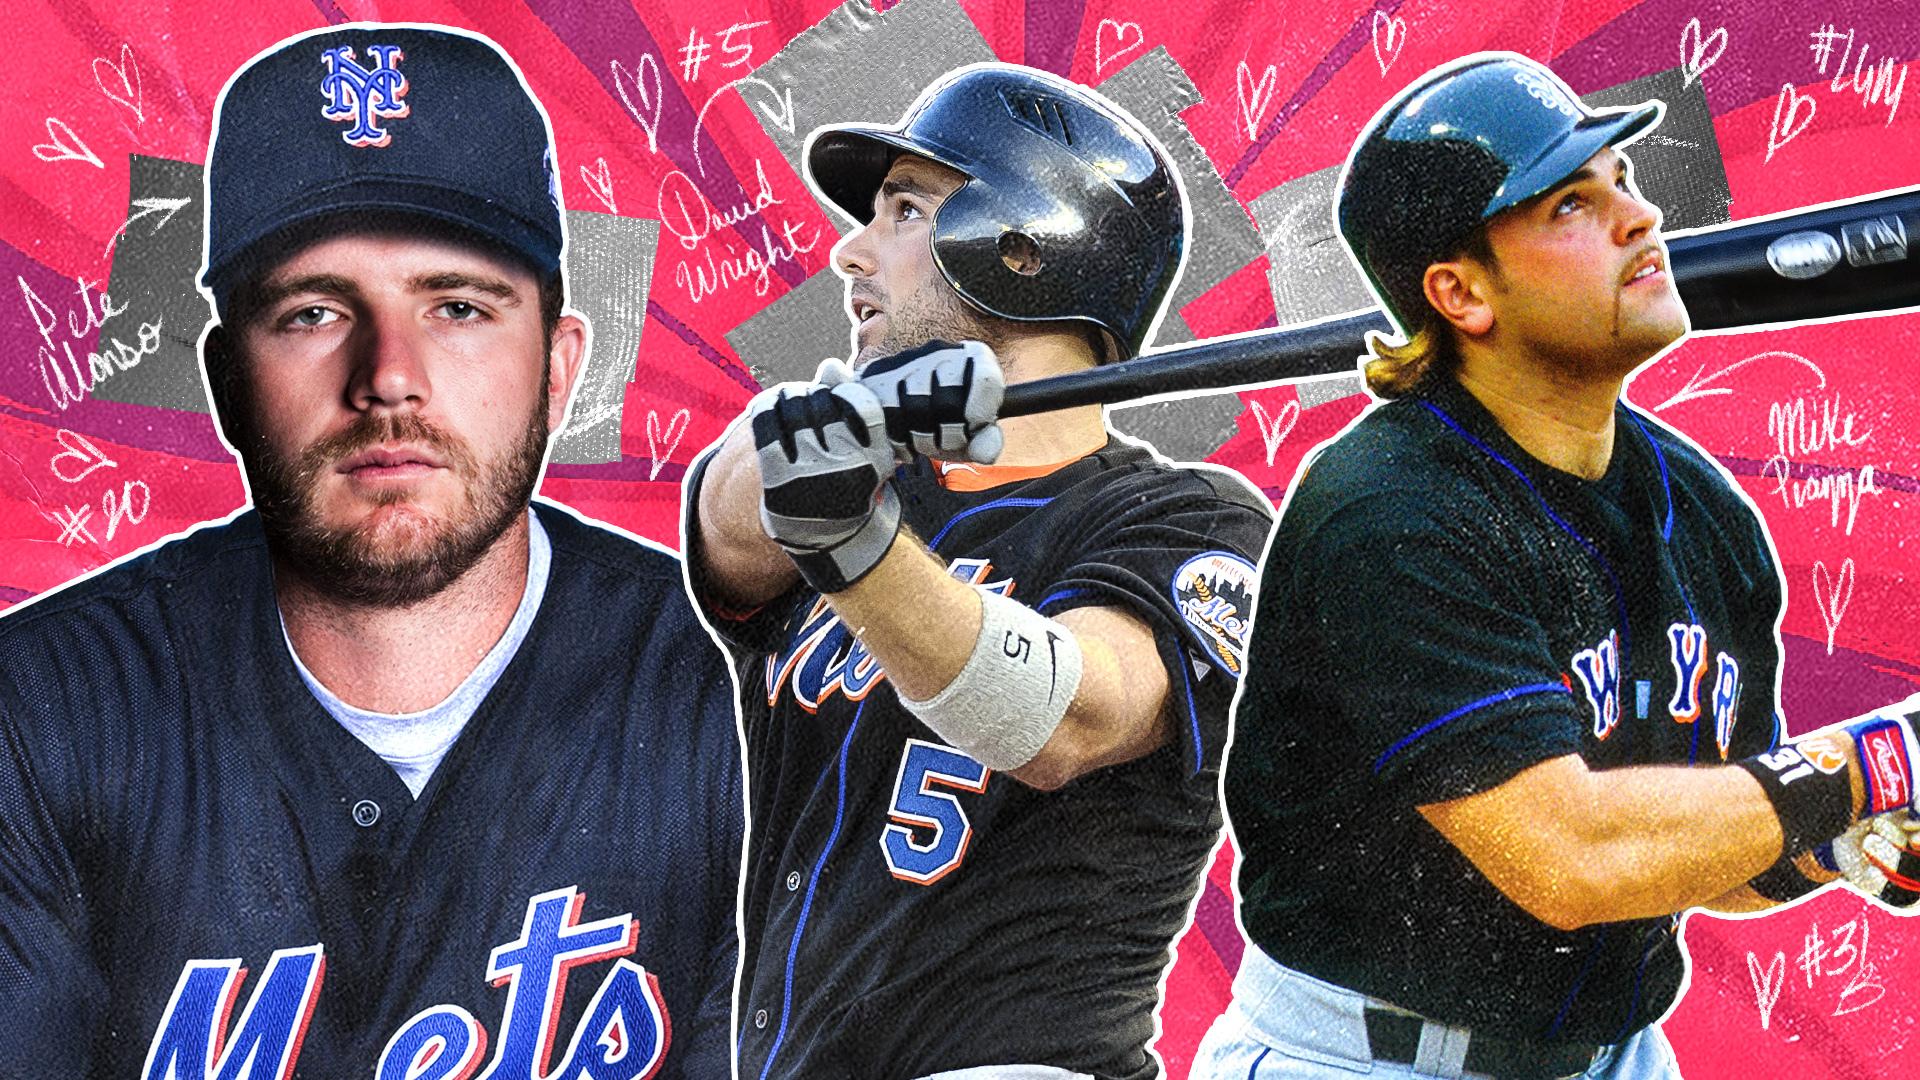 Pete Alonso, David Wright, and Mike Piazza / SNY treated image